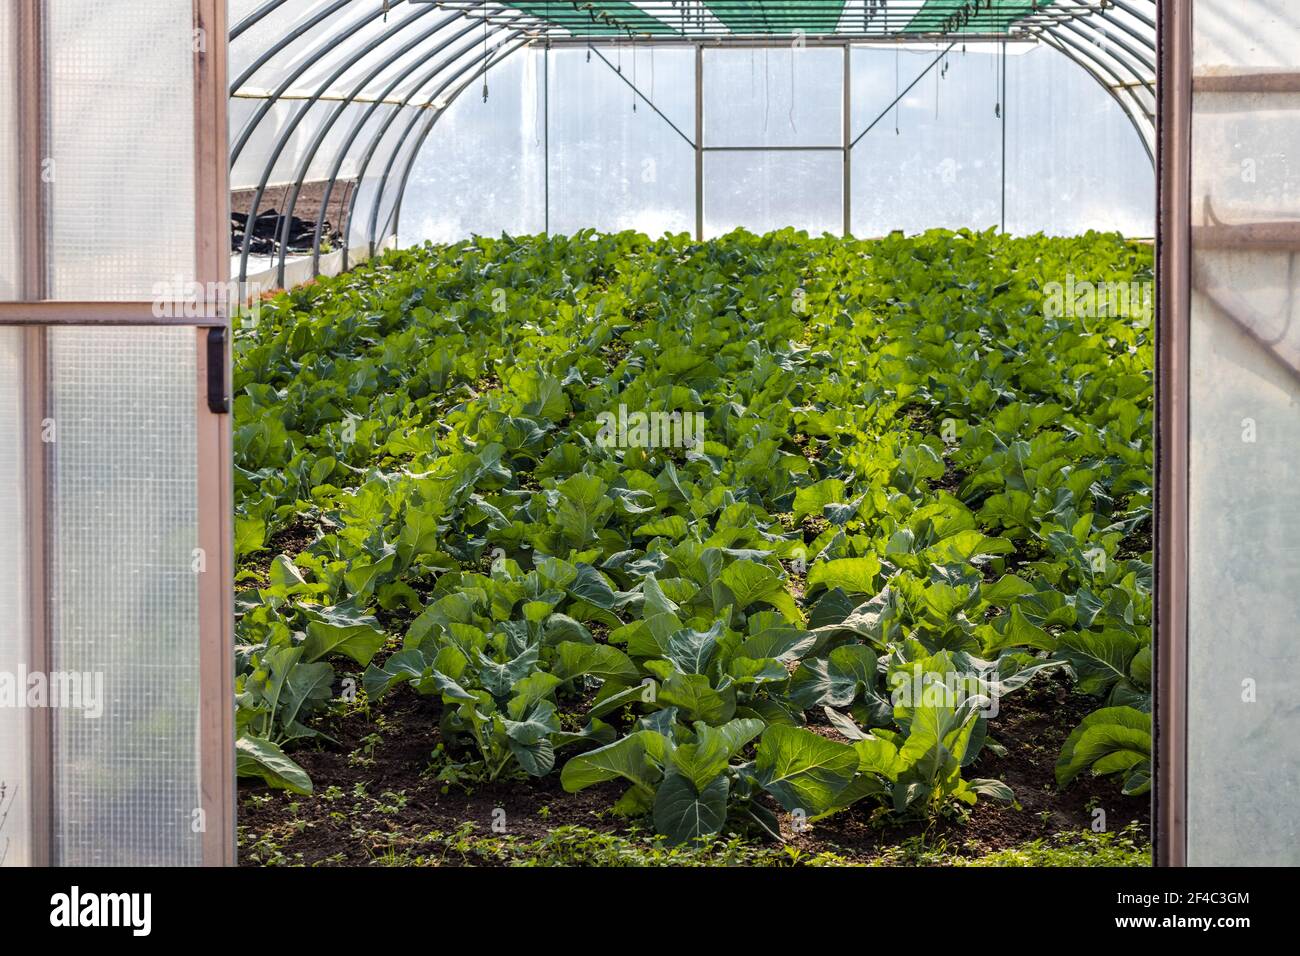 Greenhouse with young cabbage plants. Organic farming in glasshouse. Stock Photo